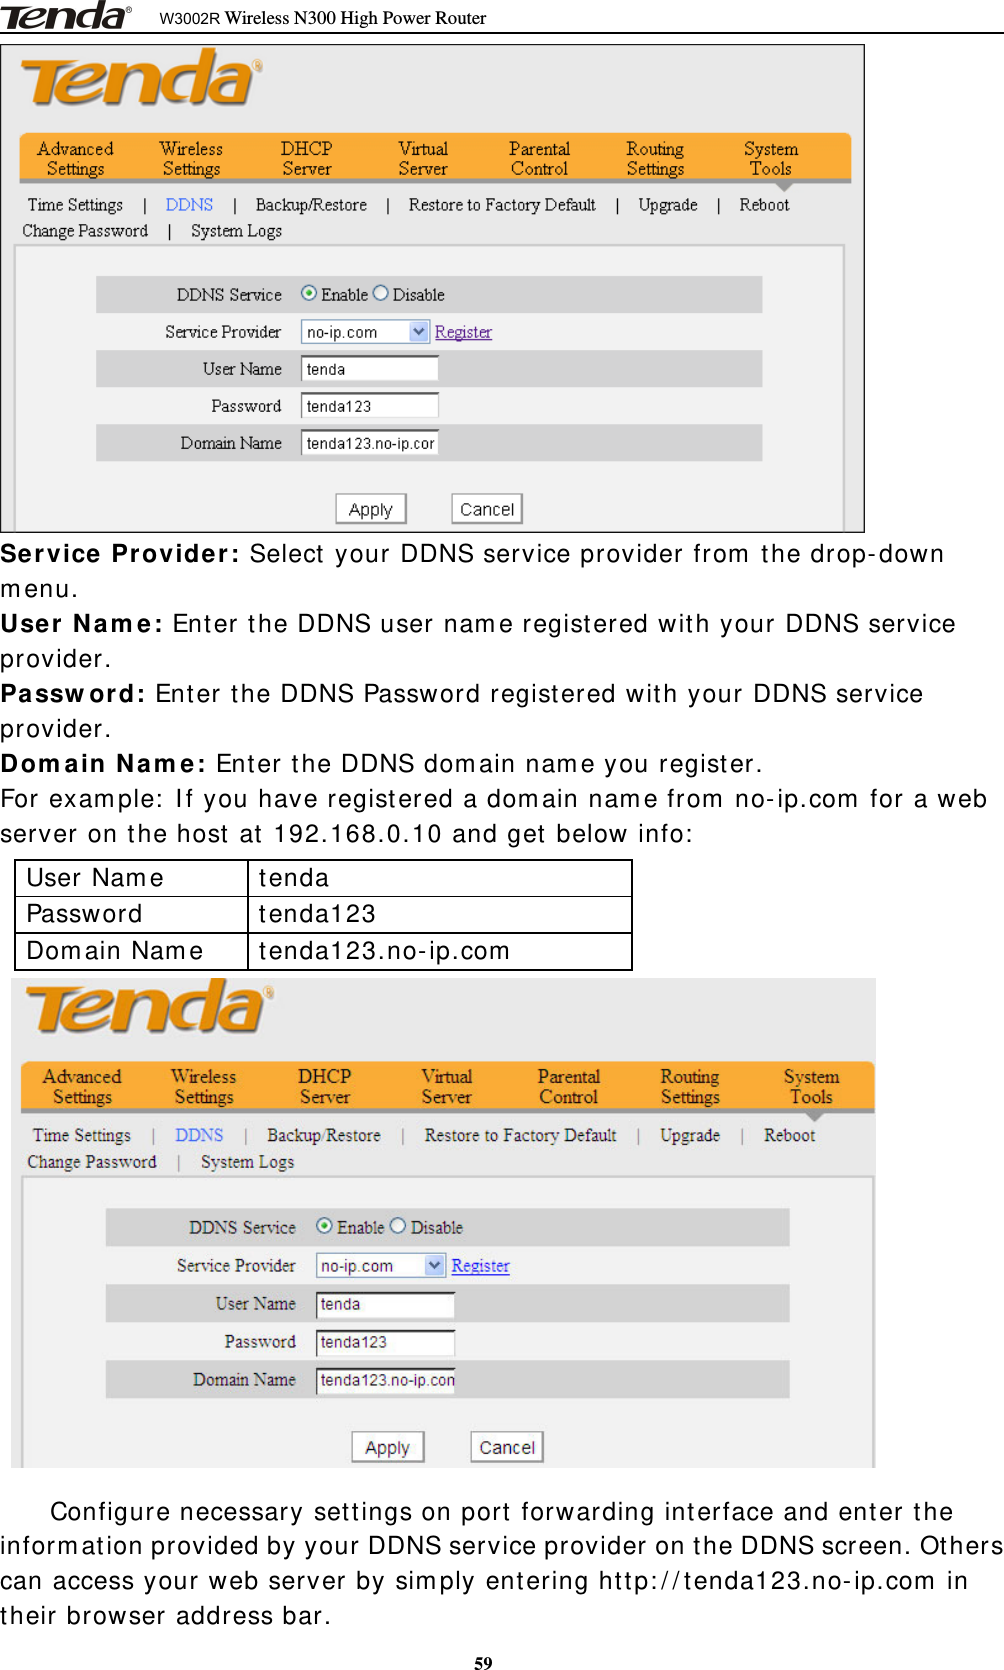 W3002R Wireless N300 High Power Router59Service Provider: Select your DDNS service provider from the drop-downmenu.User Name: Enter the DDNS user name registered with your DDNS serviceprovider.Password: Enter the DDNS Password registered with your DDNS serviceprovider.Domain Name: Enter the DDNS domain name you register.For example: If you have registered a domain name from no-ip.com for a webserver on the host at 192.168.0.10 and get below info:User Name tendaPassword tenda123Domain Name tenda123.no-ip.comConfigure necessary settings on port forwarding interface and enter theinformation provided by your DDNS service provider on the DDNS screen. Otherscan access your web server by simply entering http://tenda123.no-ip.com intheir browser address bar.